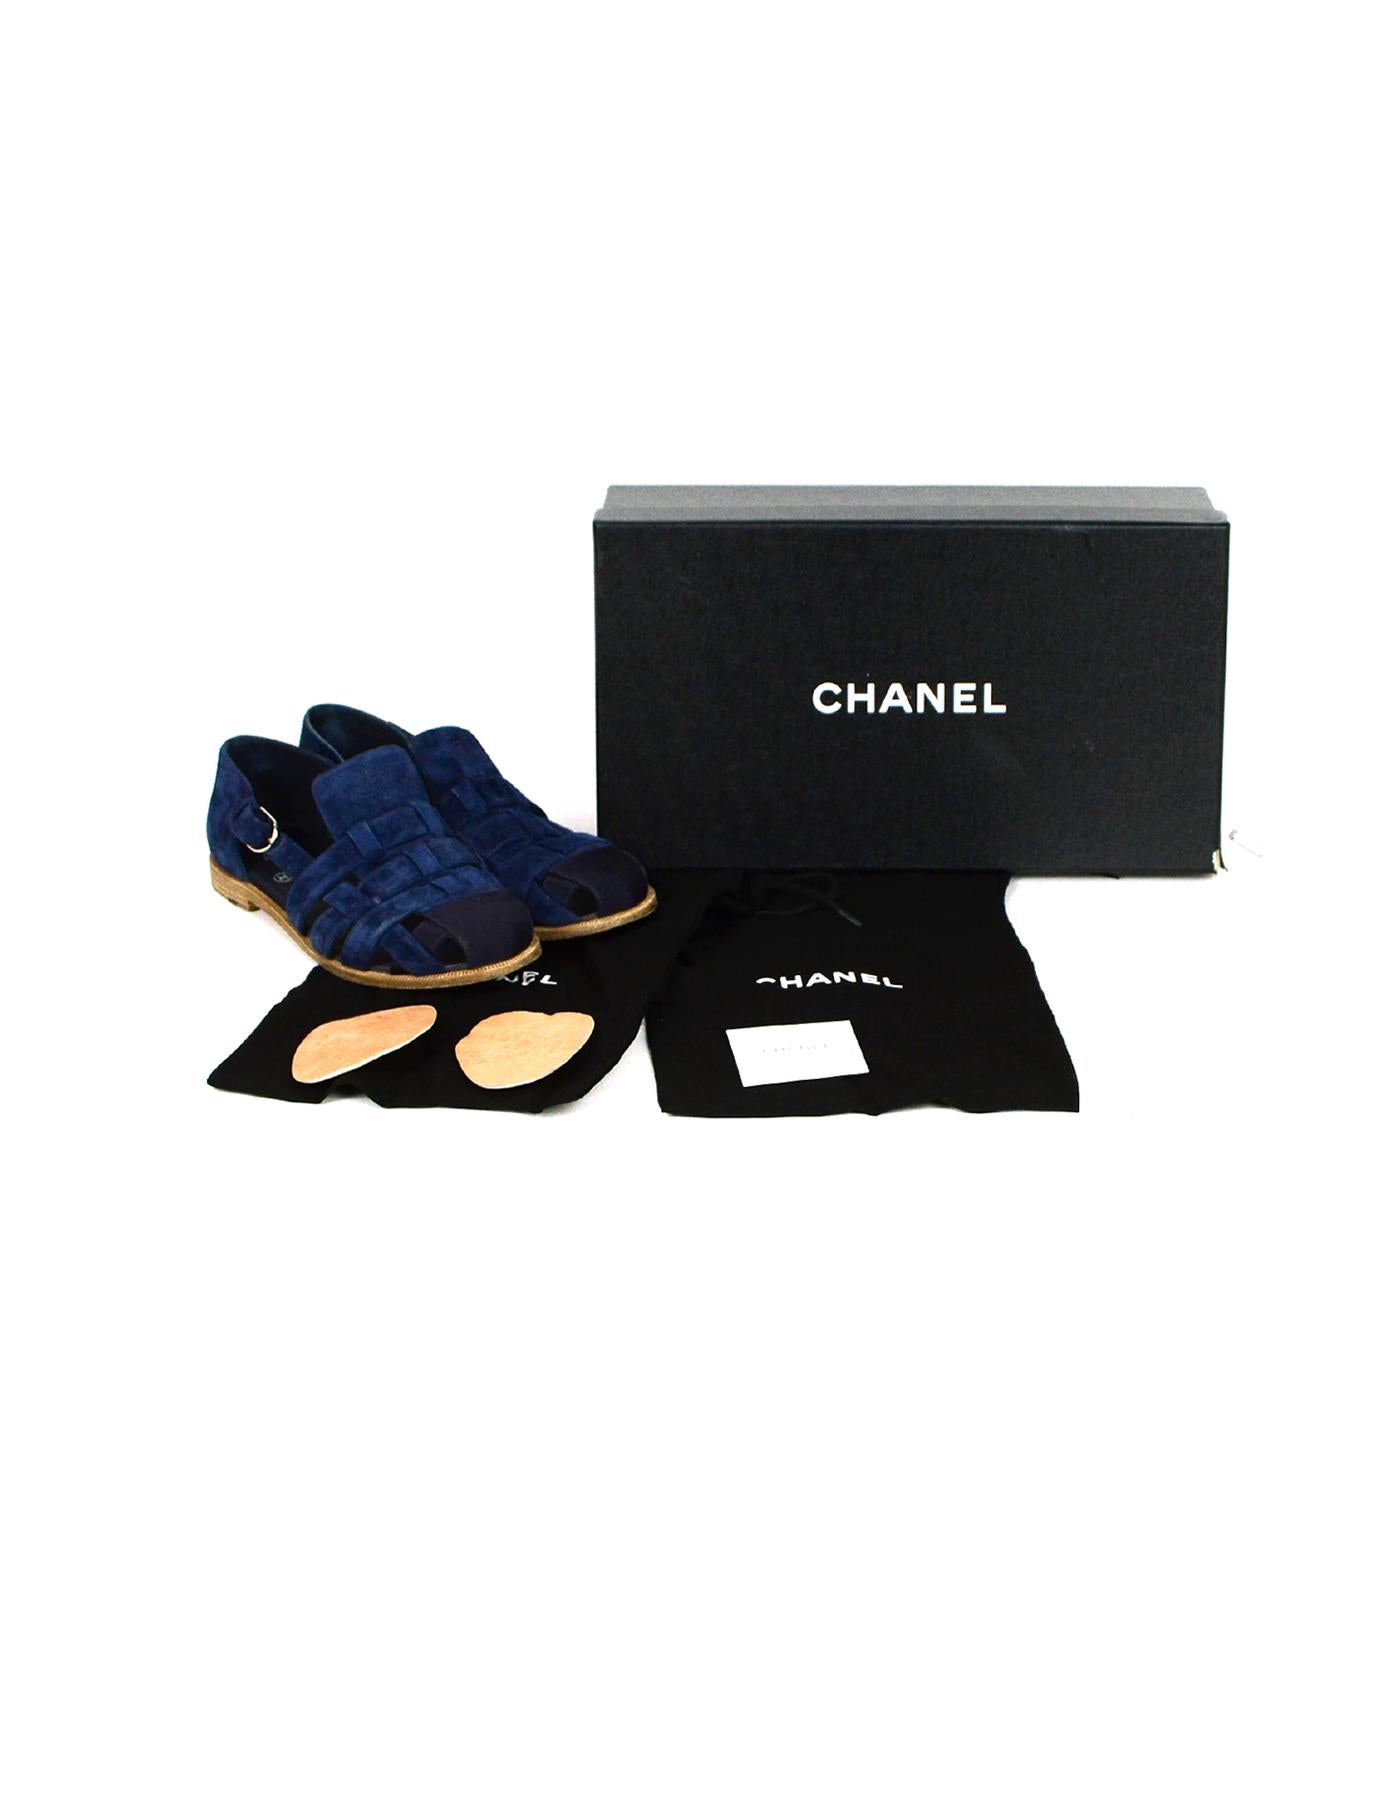 Chanel Navy Suede Woven Sandals sz 37.5 2